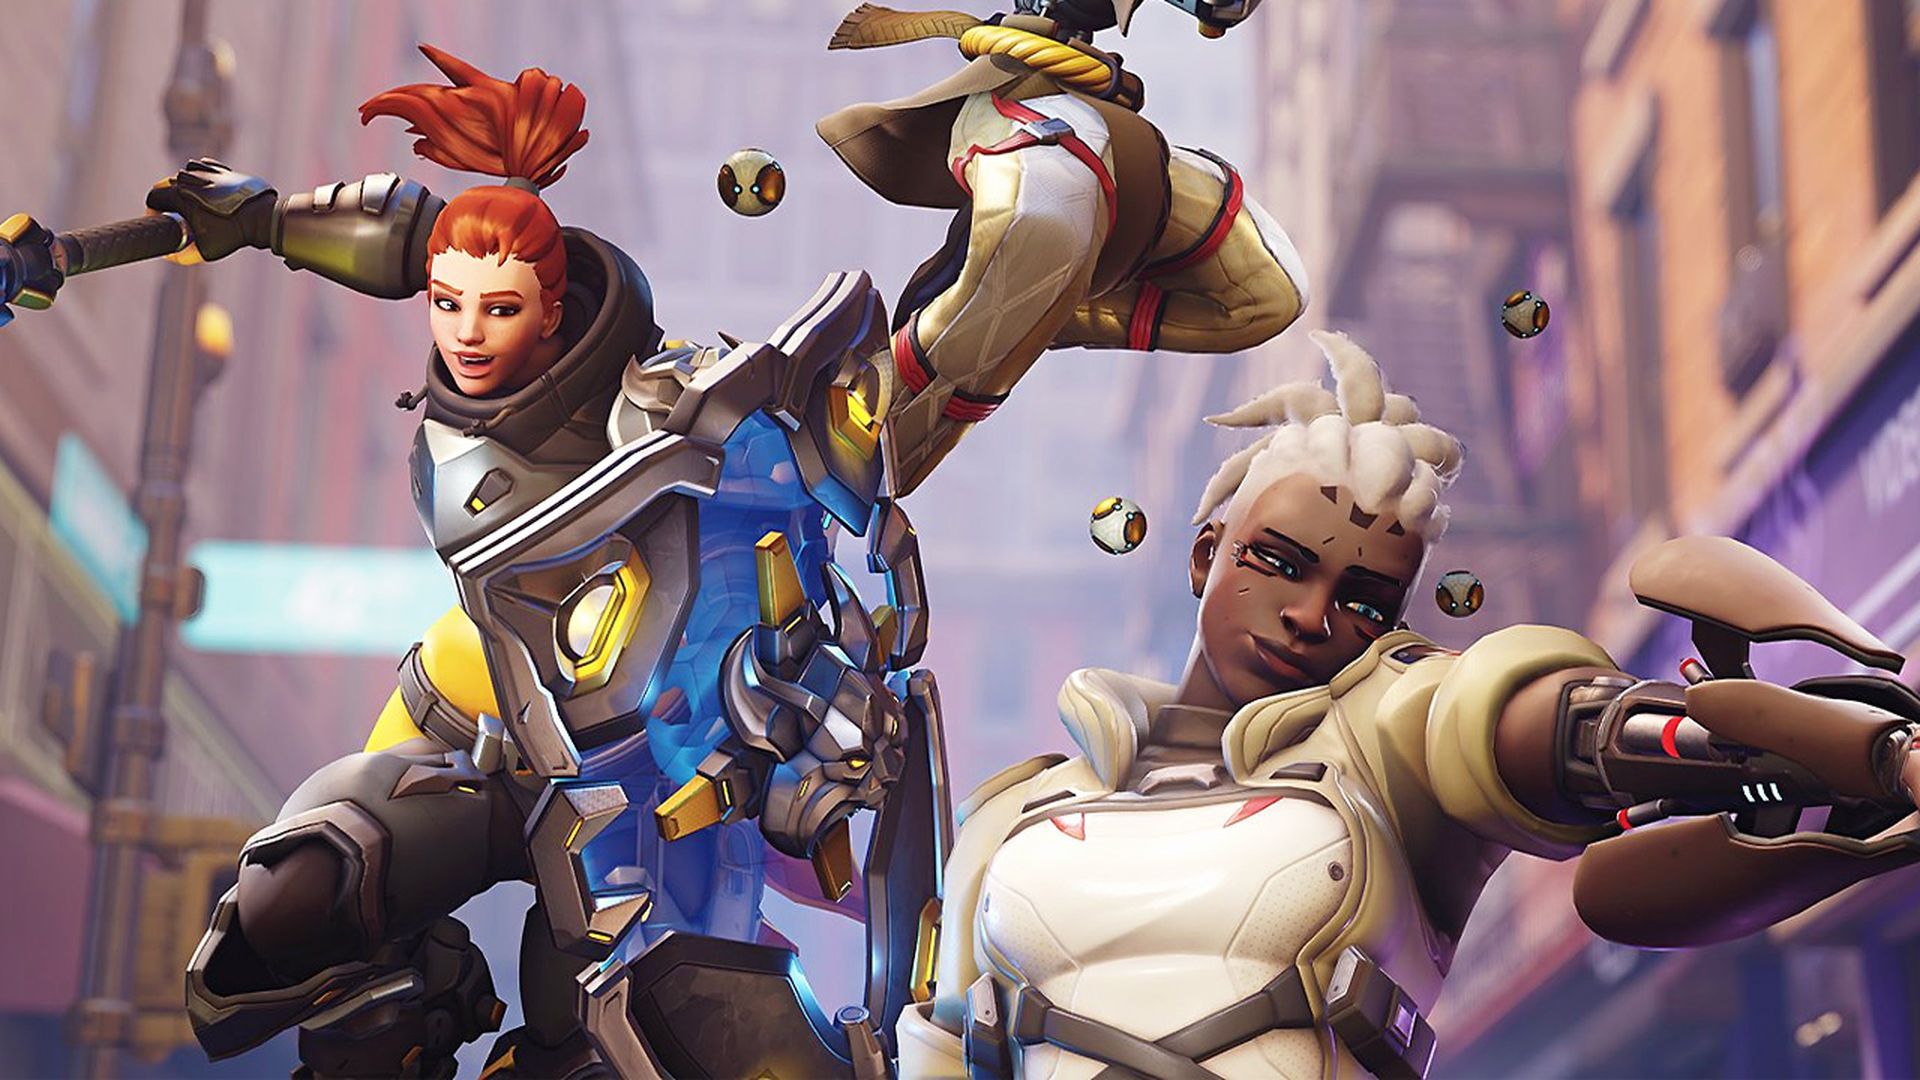 Is Overwatch 2 good? This is the question on many gamers' minds as the new game's PvP launches for everyone to enjoy. Overwatch 2 occupies a liminal zone...